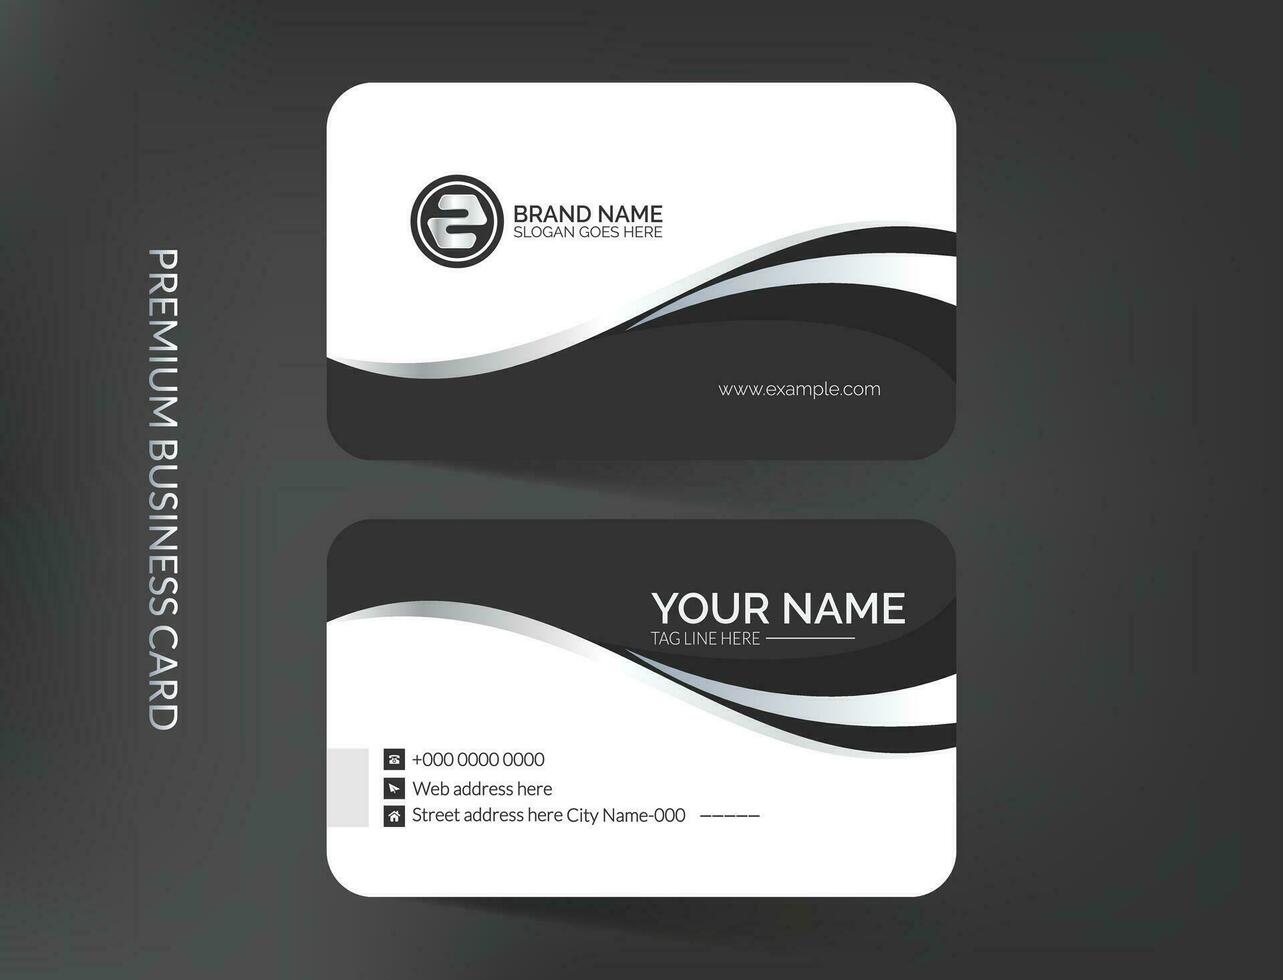 Corporate business card template vector design,Simple visiting card layout